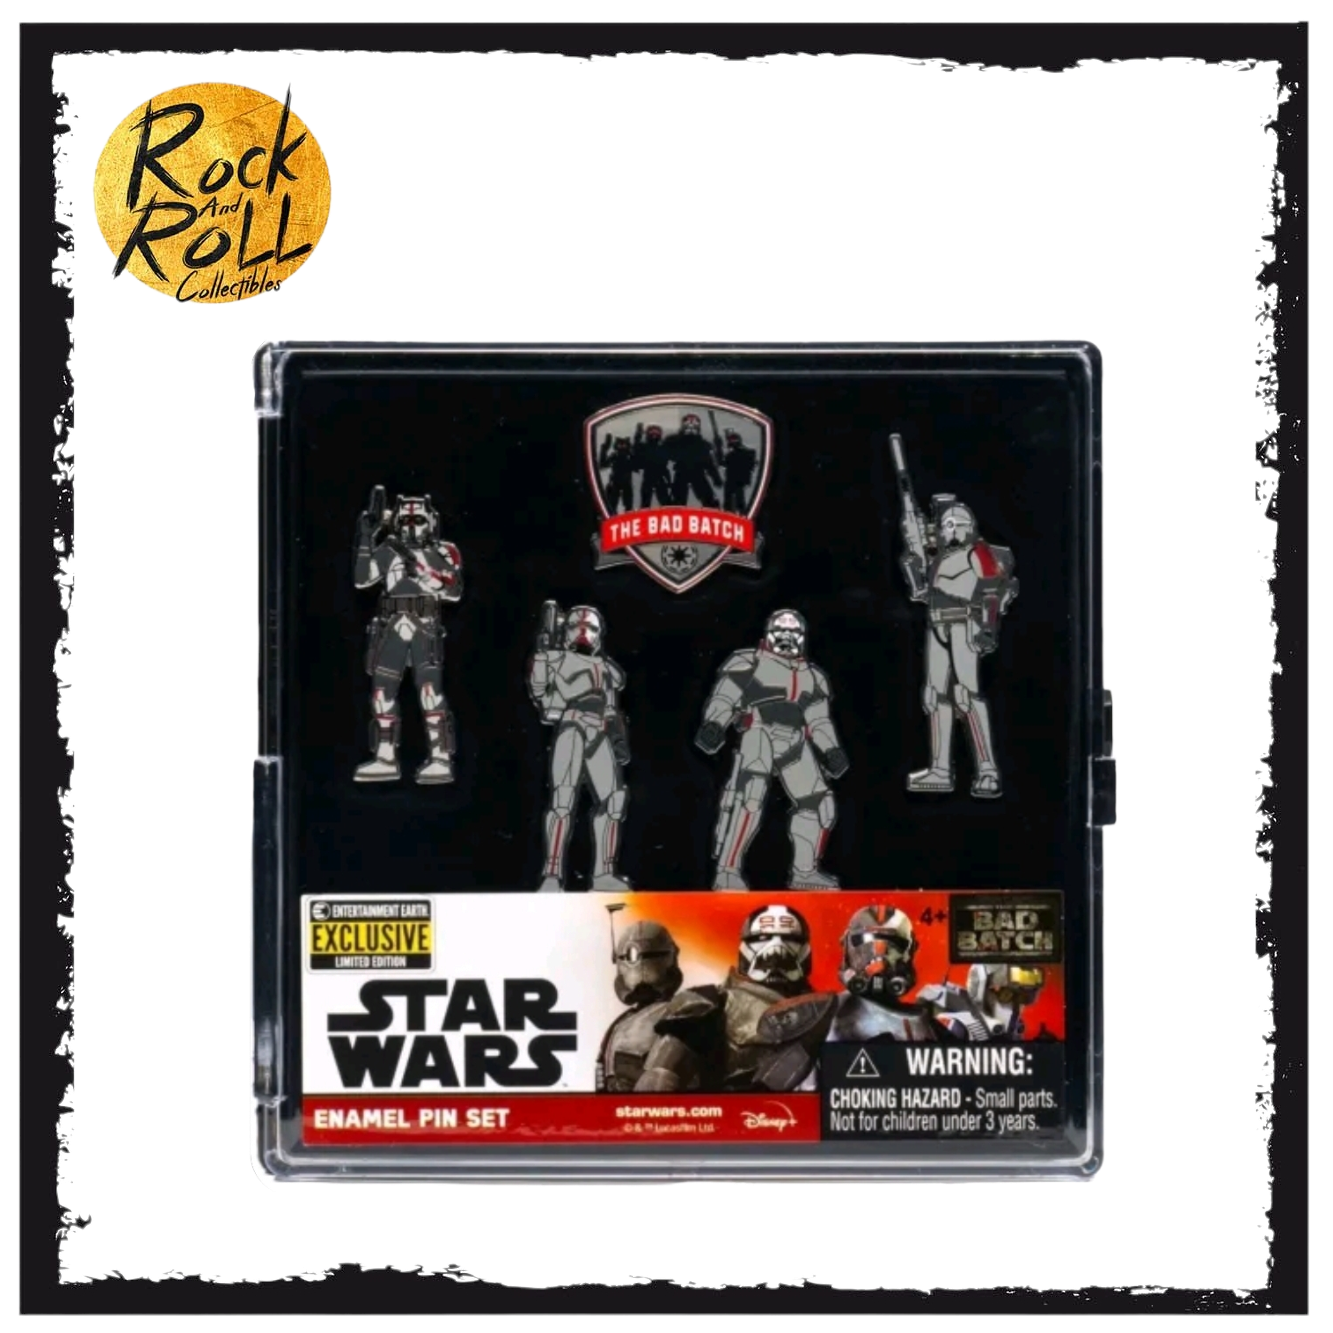 Star Wars: The Bad Batch Enamel Pin 5 Pack Entertainment Earth Exclusive